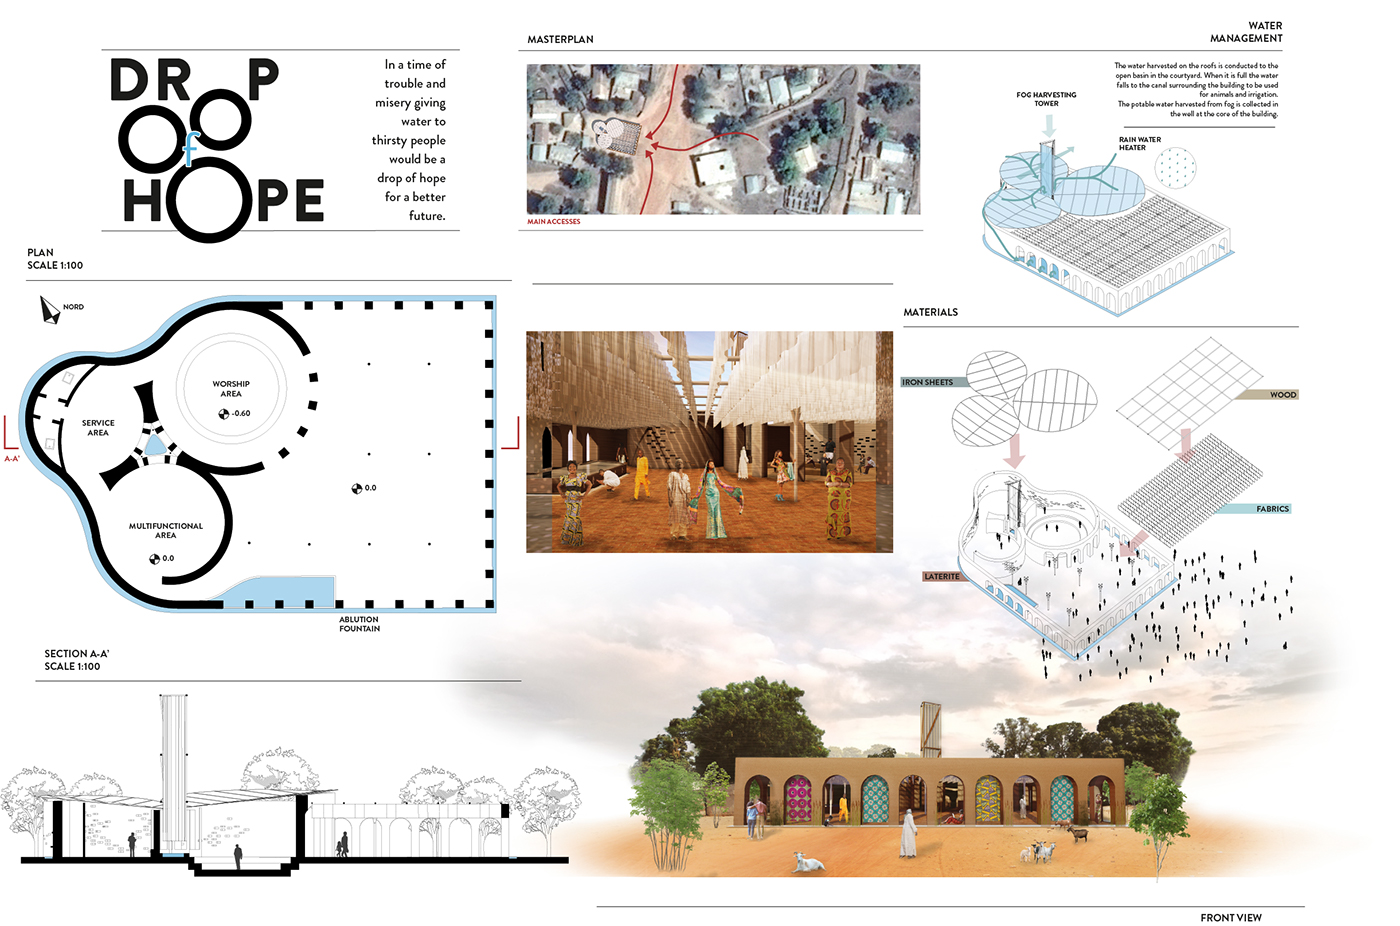 architecture africa Water Project heart wall water managment Answer42 multifunctional Answer 42 architects